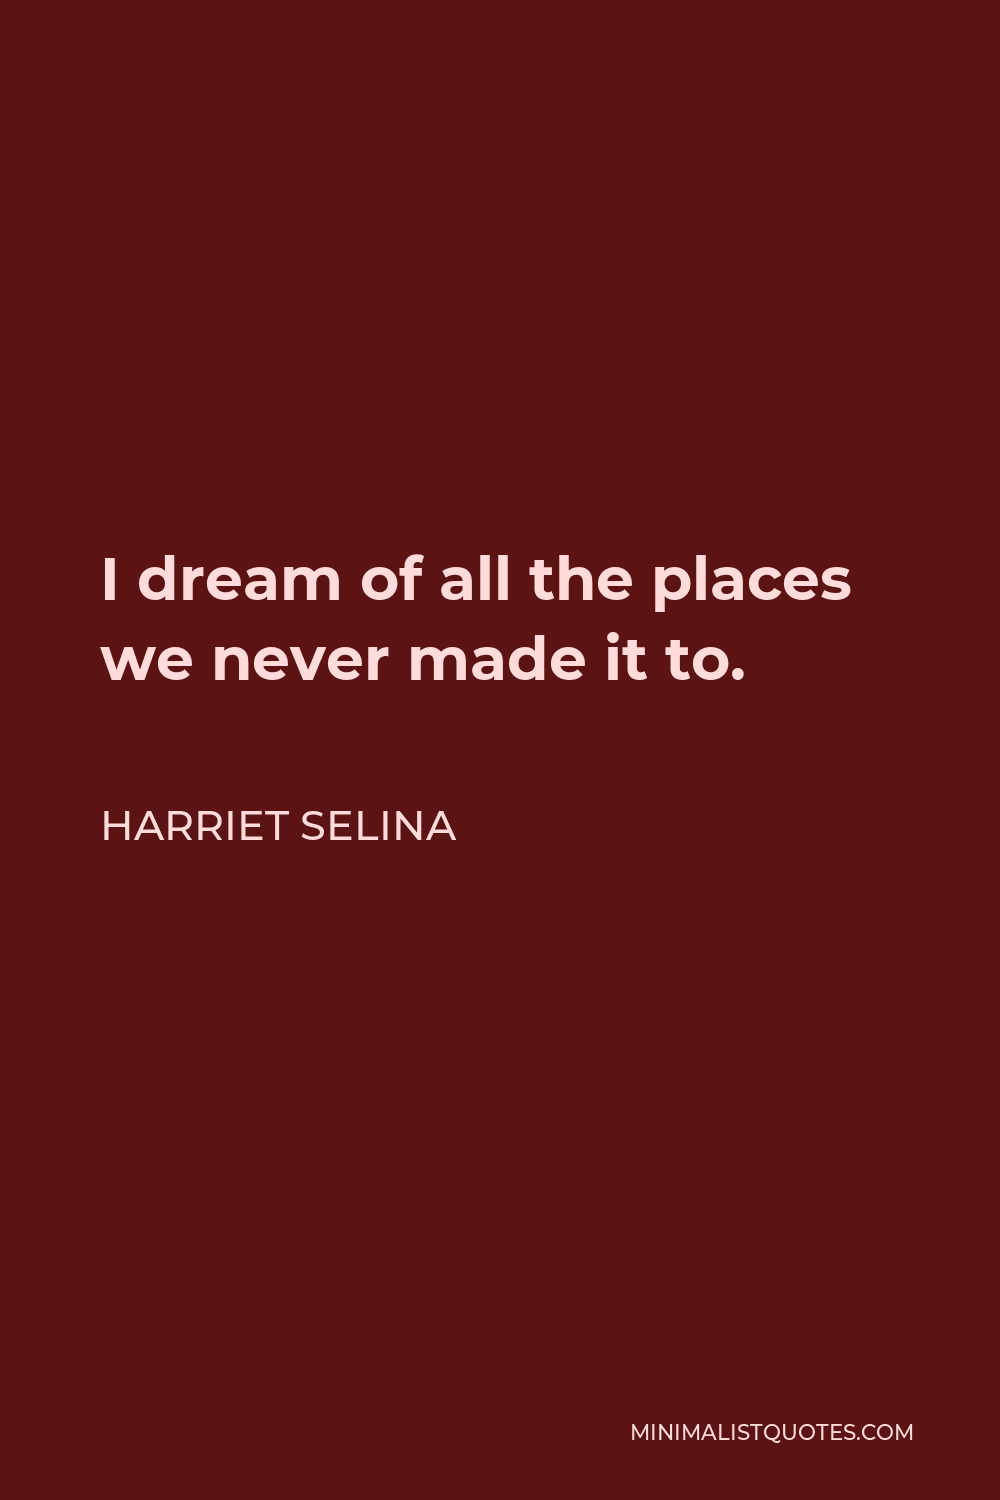 Harriet Selina Quote - I dream of all the places we never made it to.